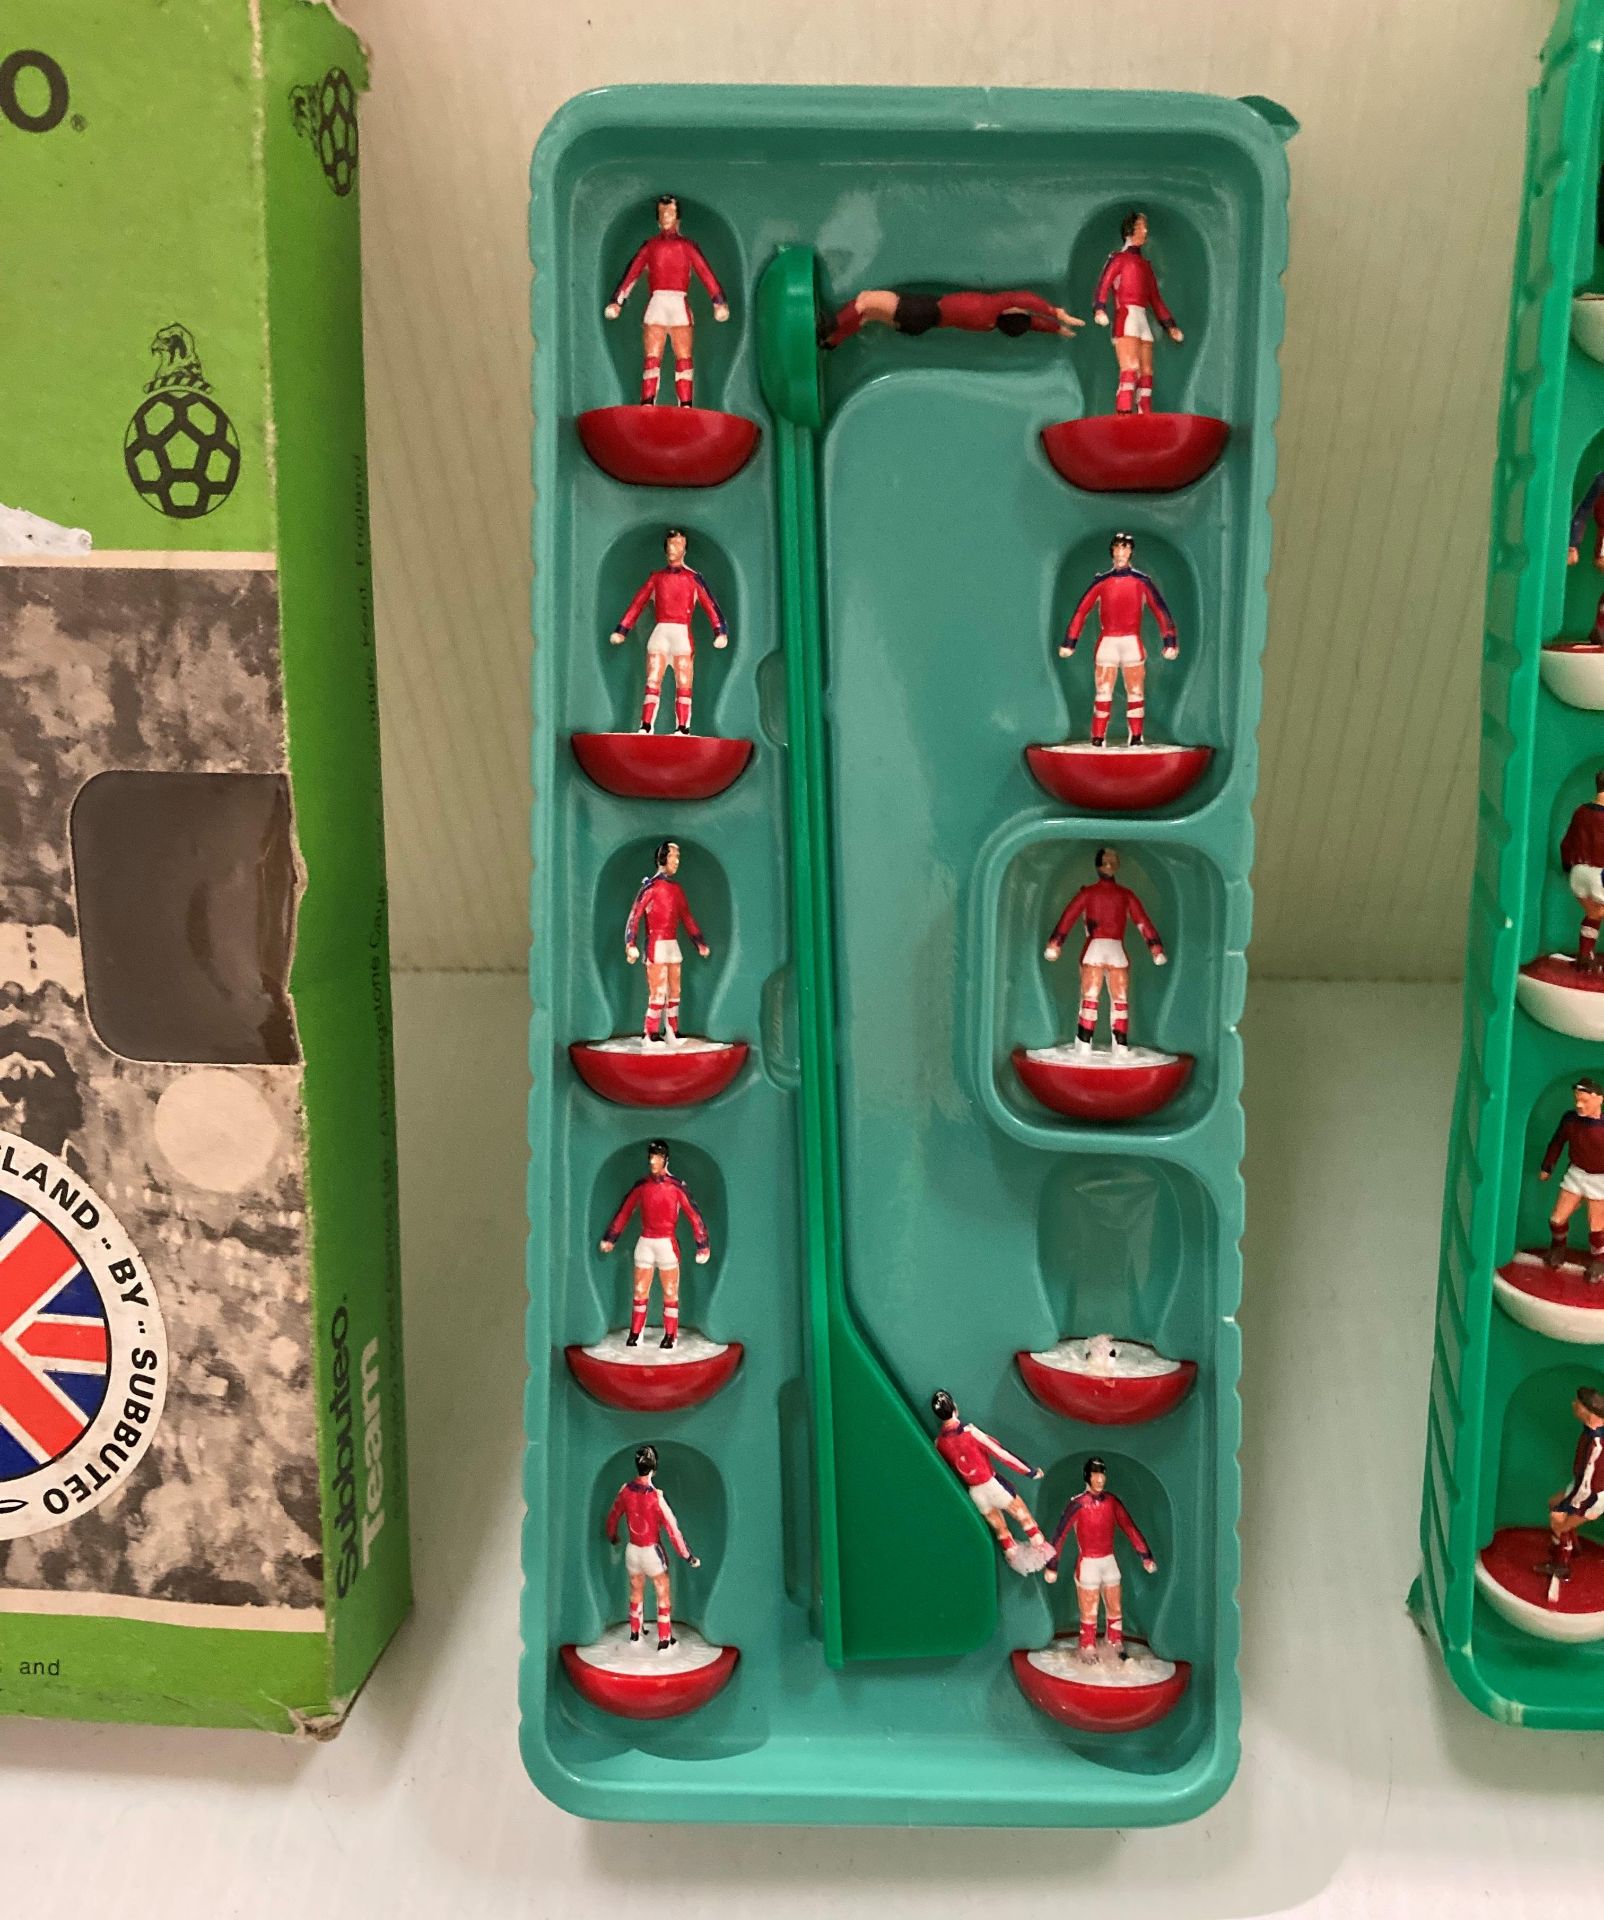 Subbuteo Team 327 West Ham United 2nd including ten players (one player in blue) and goalie in box, - Image 2 of 4